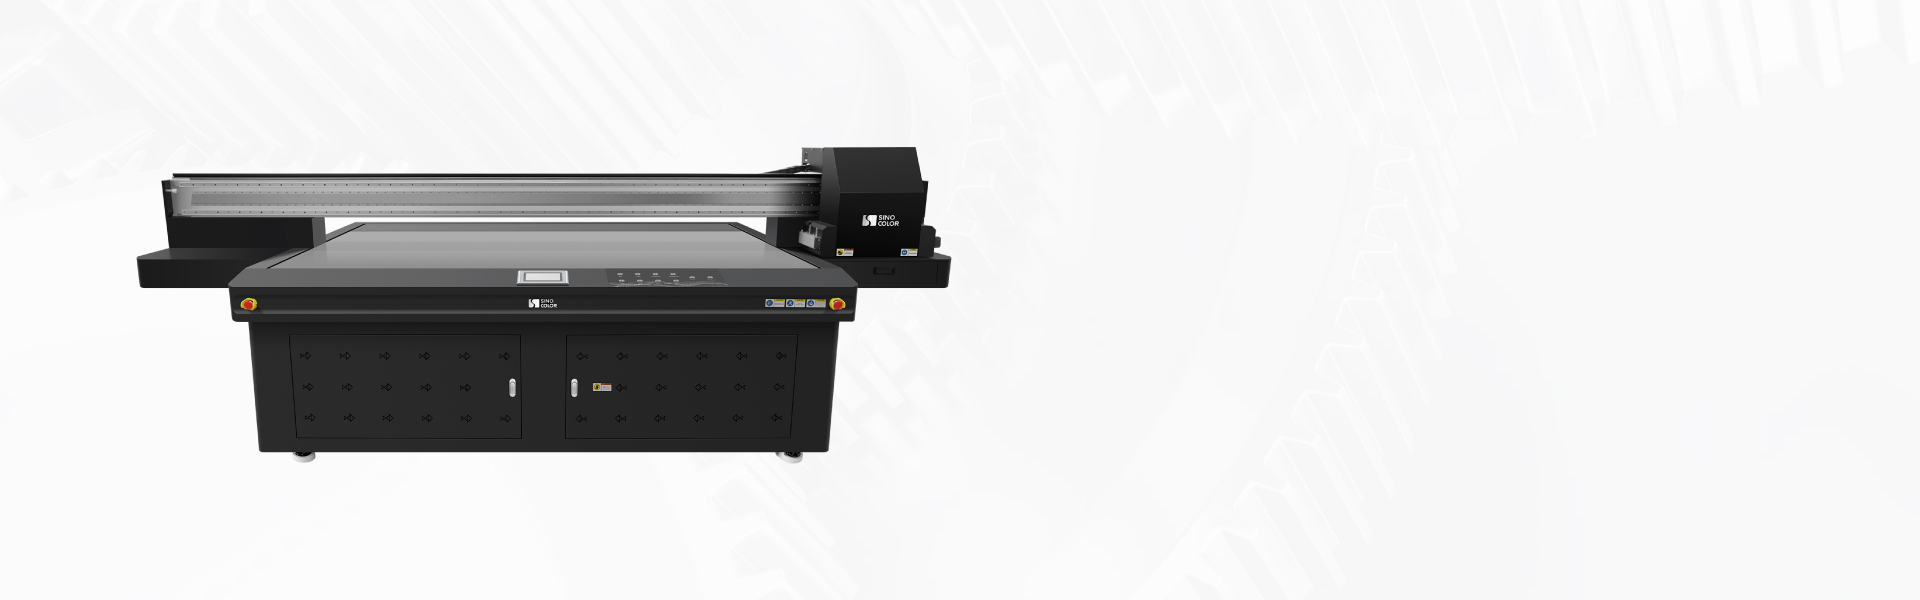 https://www.sinocolordg.com/products/uv-printer/uv-flatbed-printer/large-format-uv-flatbed-printer-fb-2513s.html images